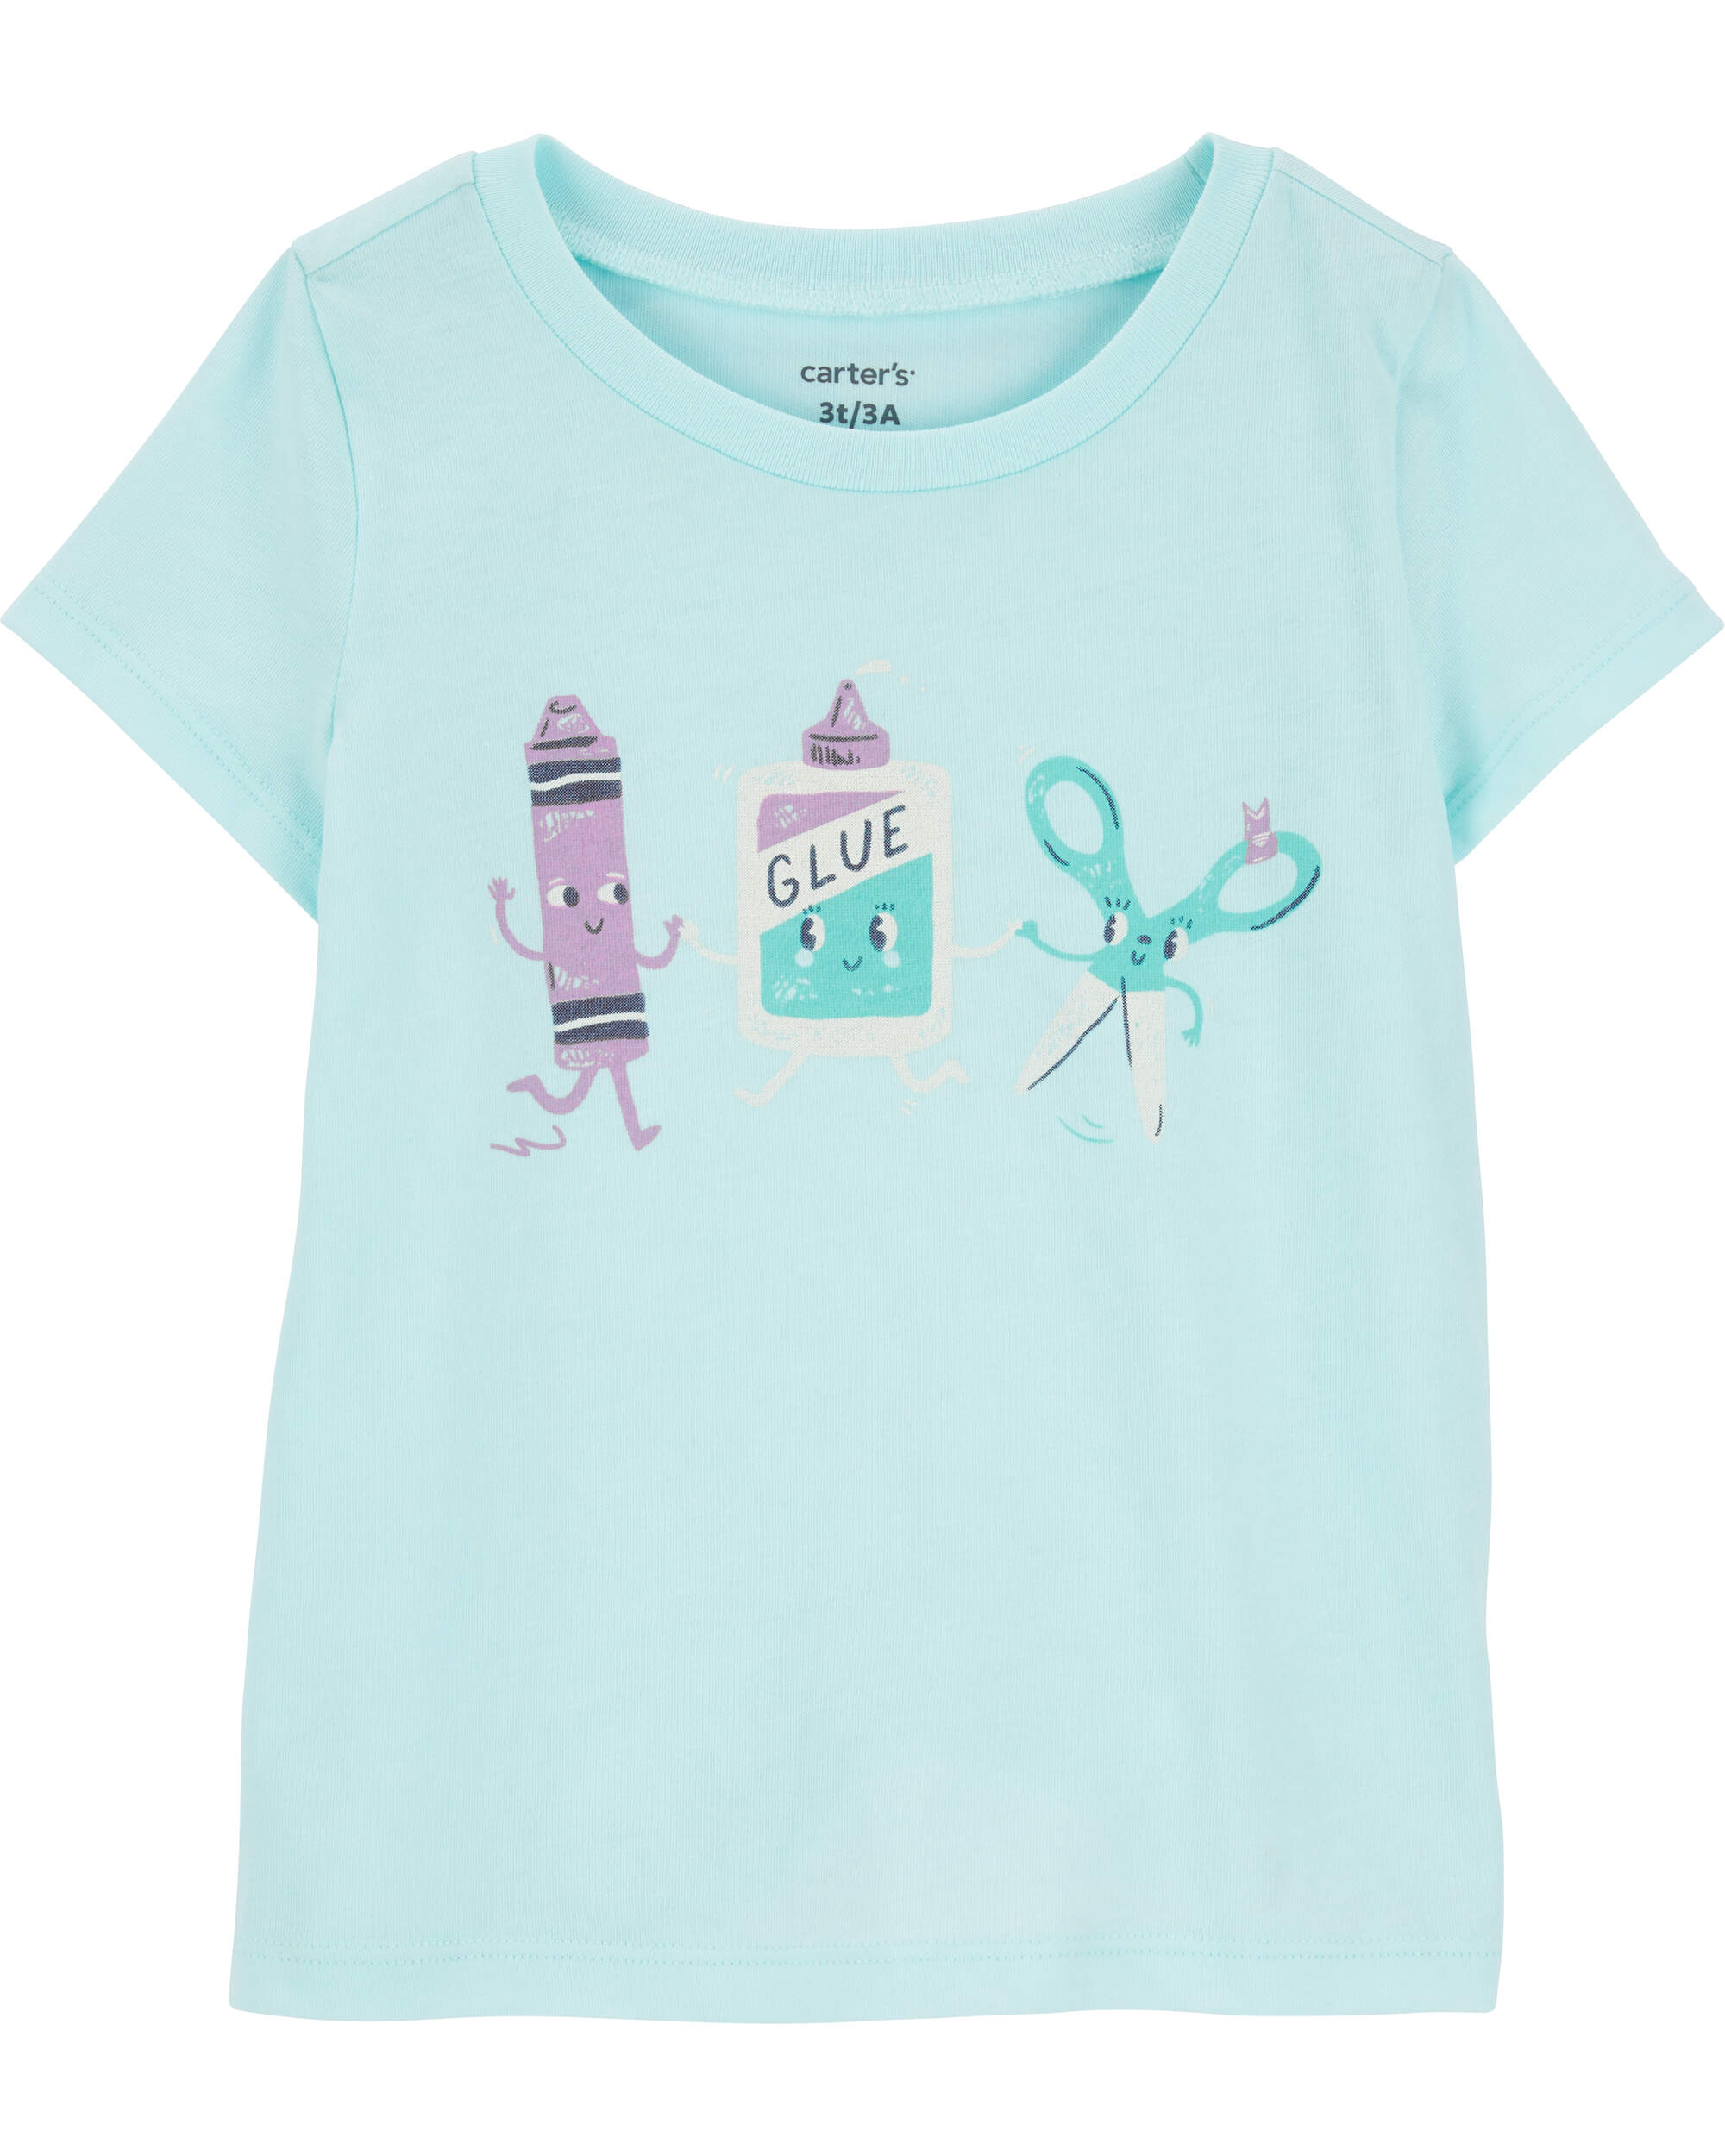 Toddler Crafty Graphic Tee